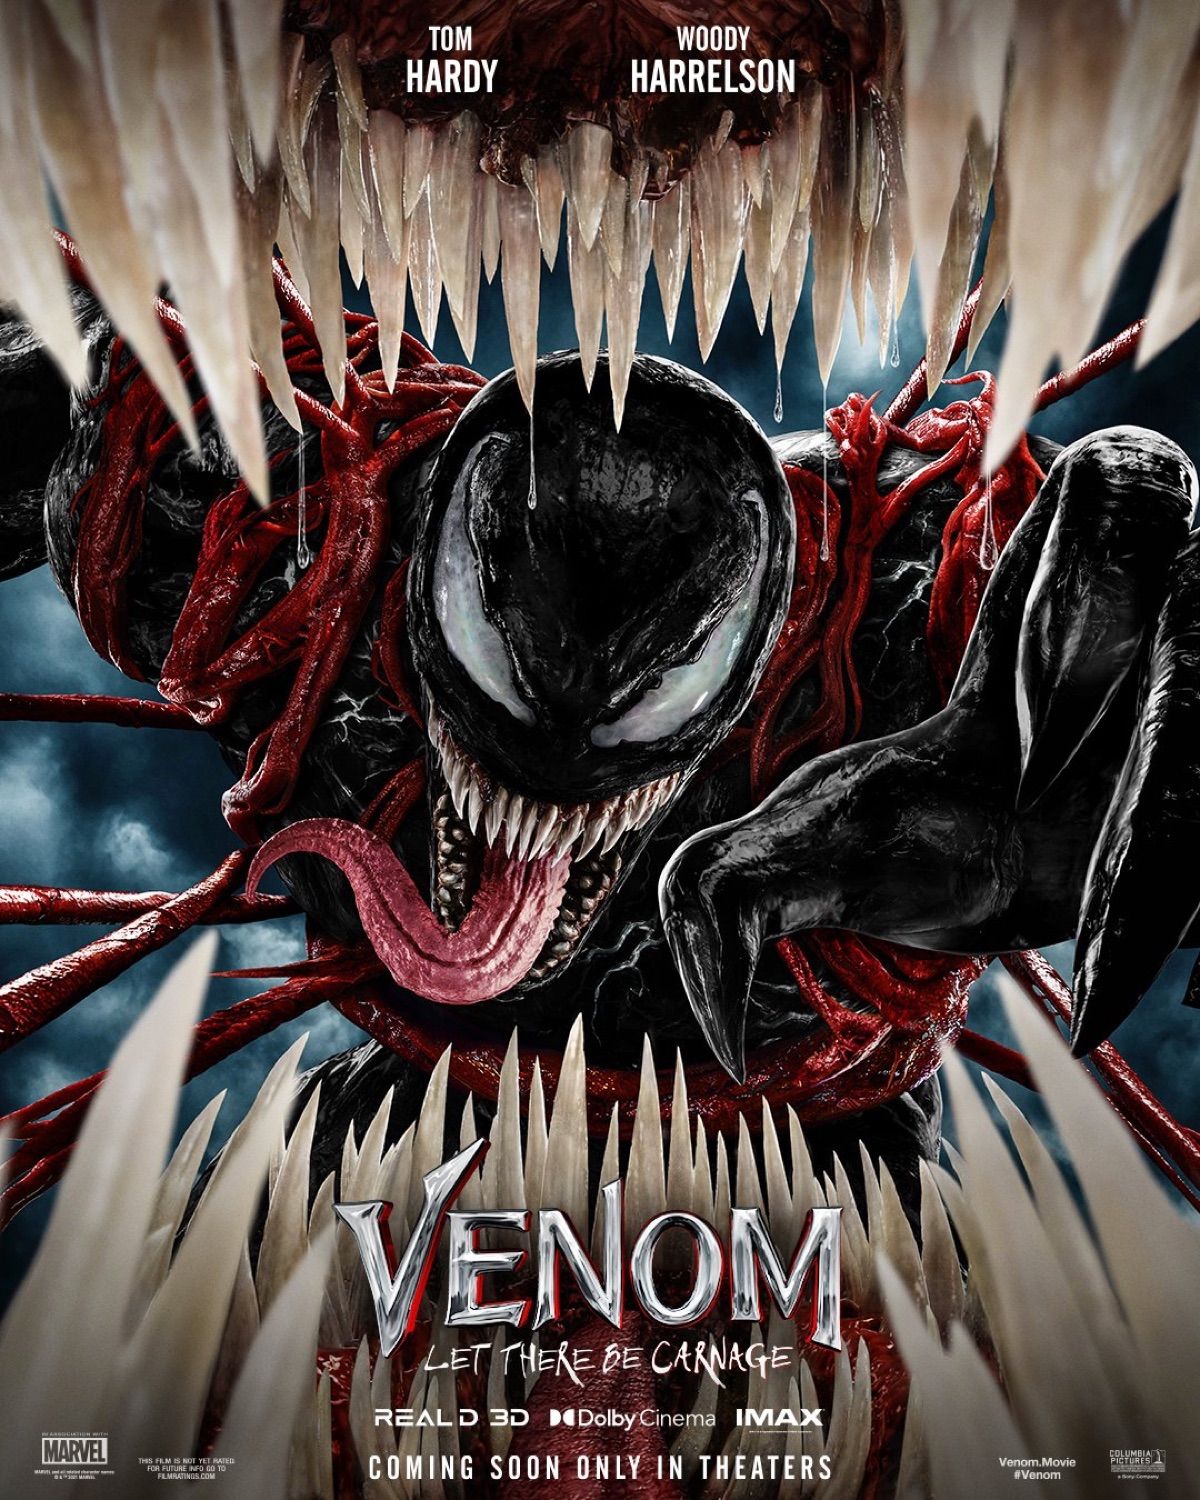 Venom 2 trailer confirms 'only theatres' release and no MCU link yet